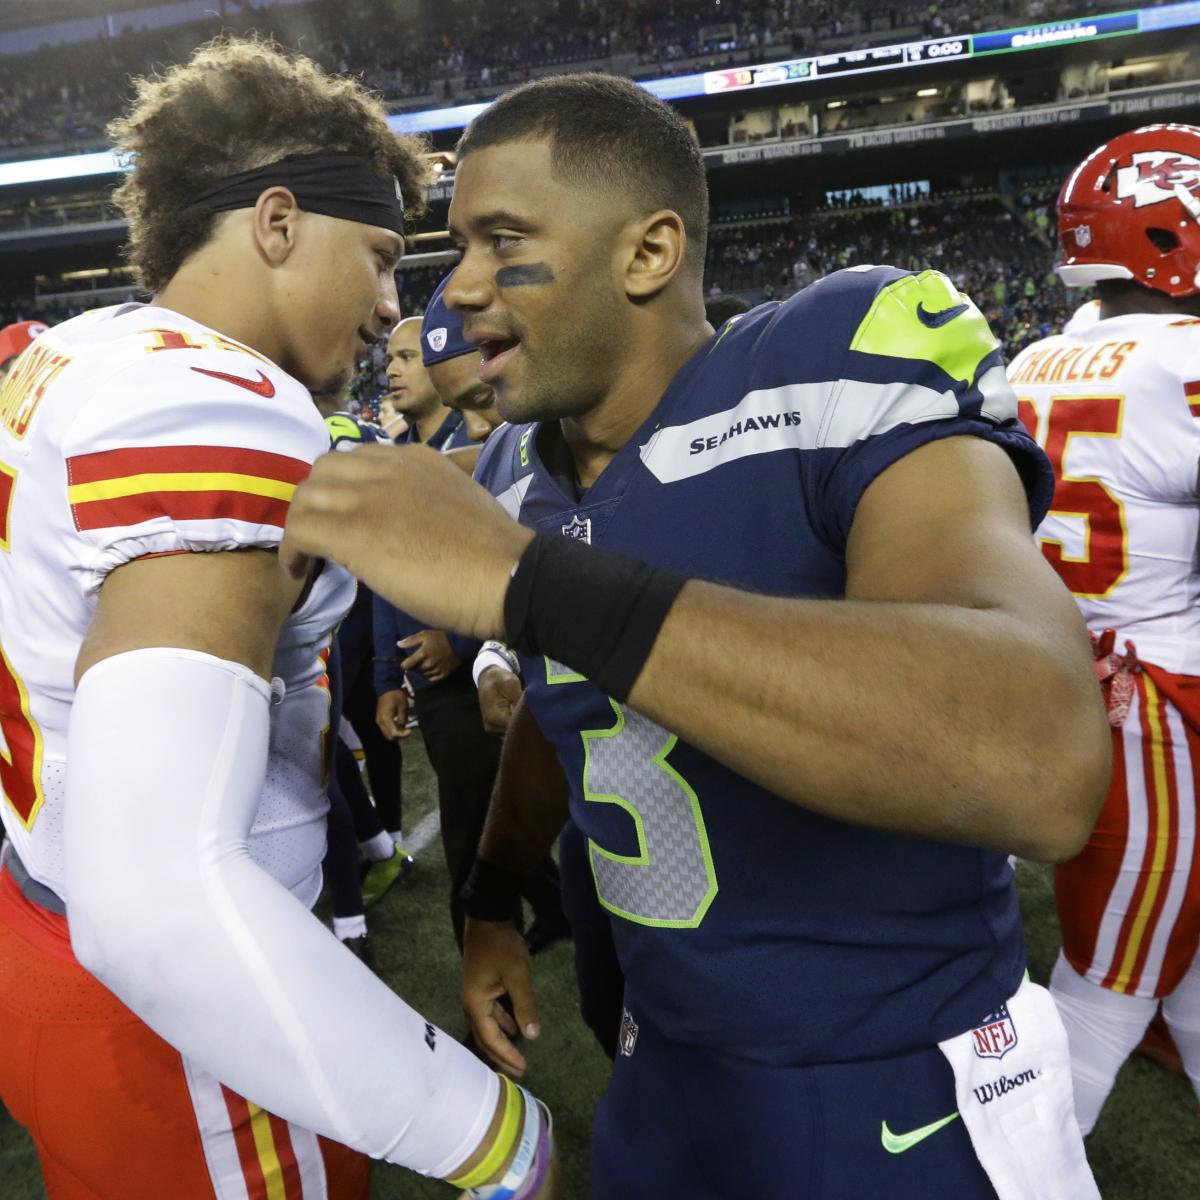 Seattle S Russell Wilson Outplays Patrick Mahomes And Enters Mvp Race Bleacher Report Latest News Videos And Highlights